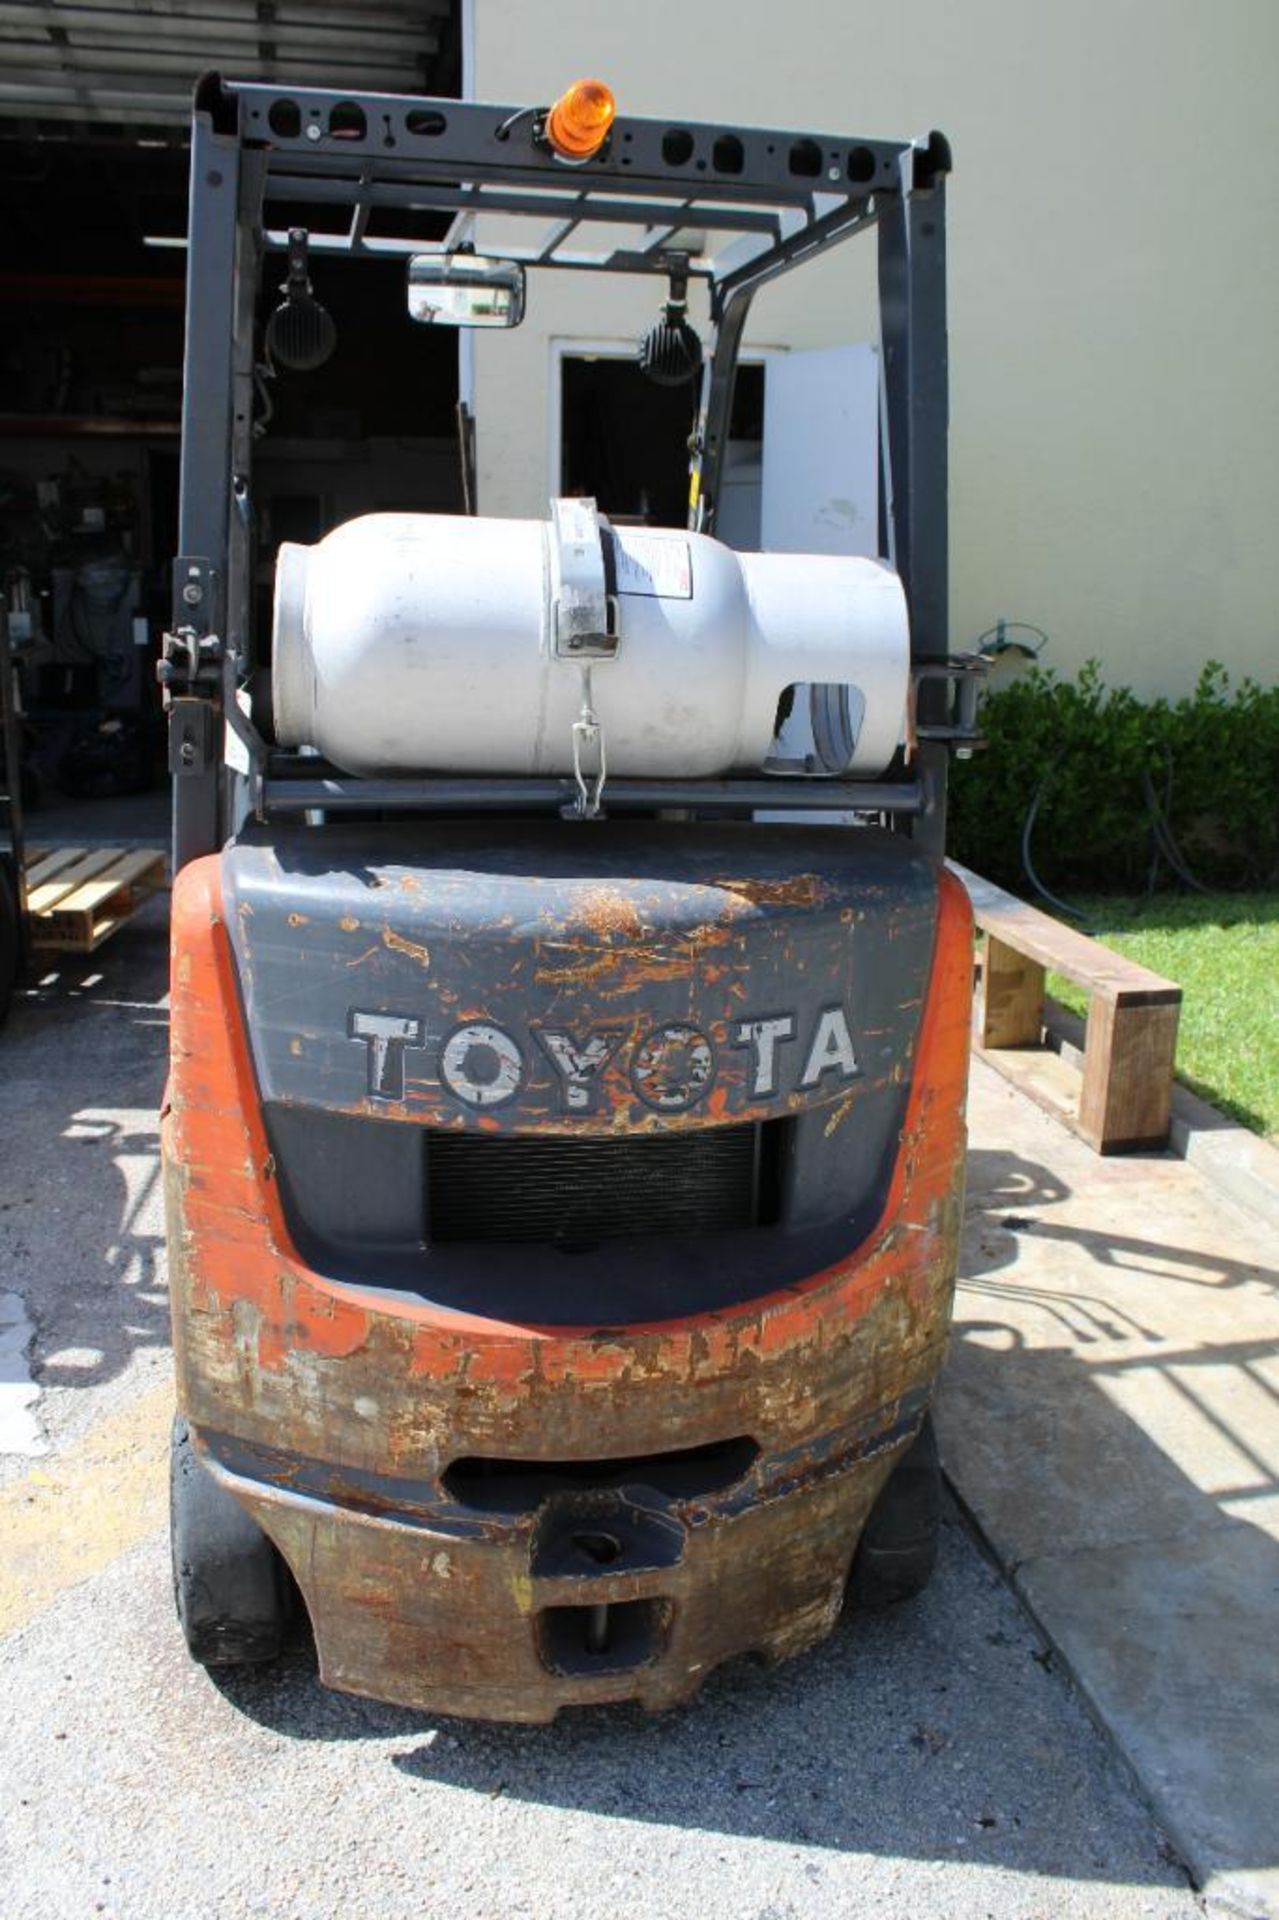 Toyota 8FGCU forklift - 8981 hours - w/lpg tank, side shift, 80 in lift, 4000 lb. capacity - Image 4 of 7